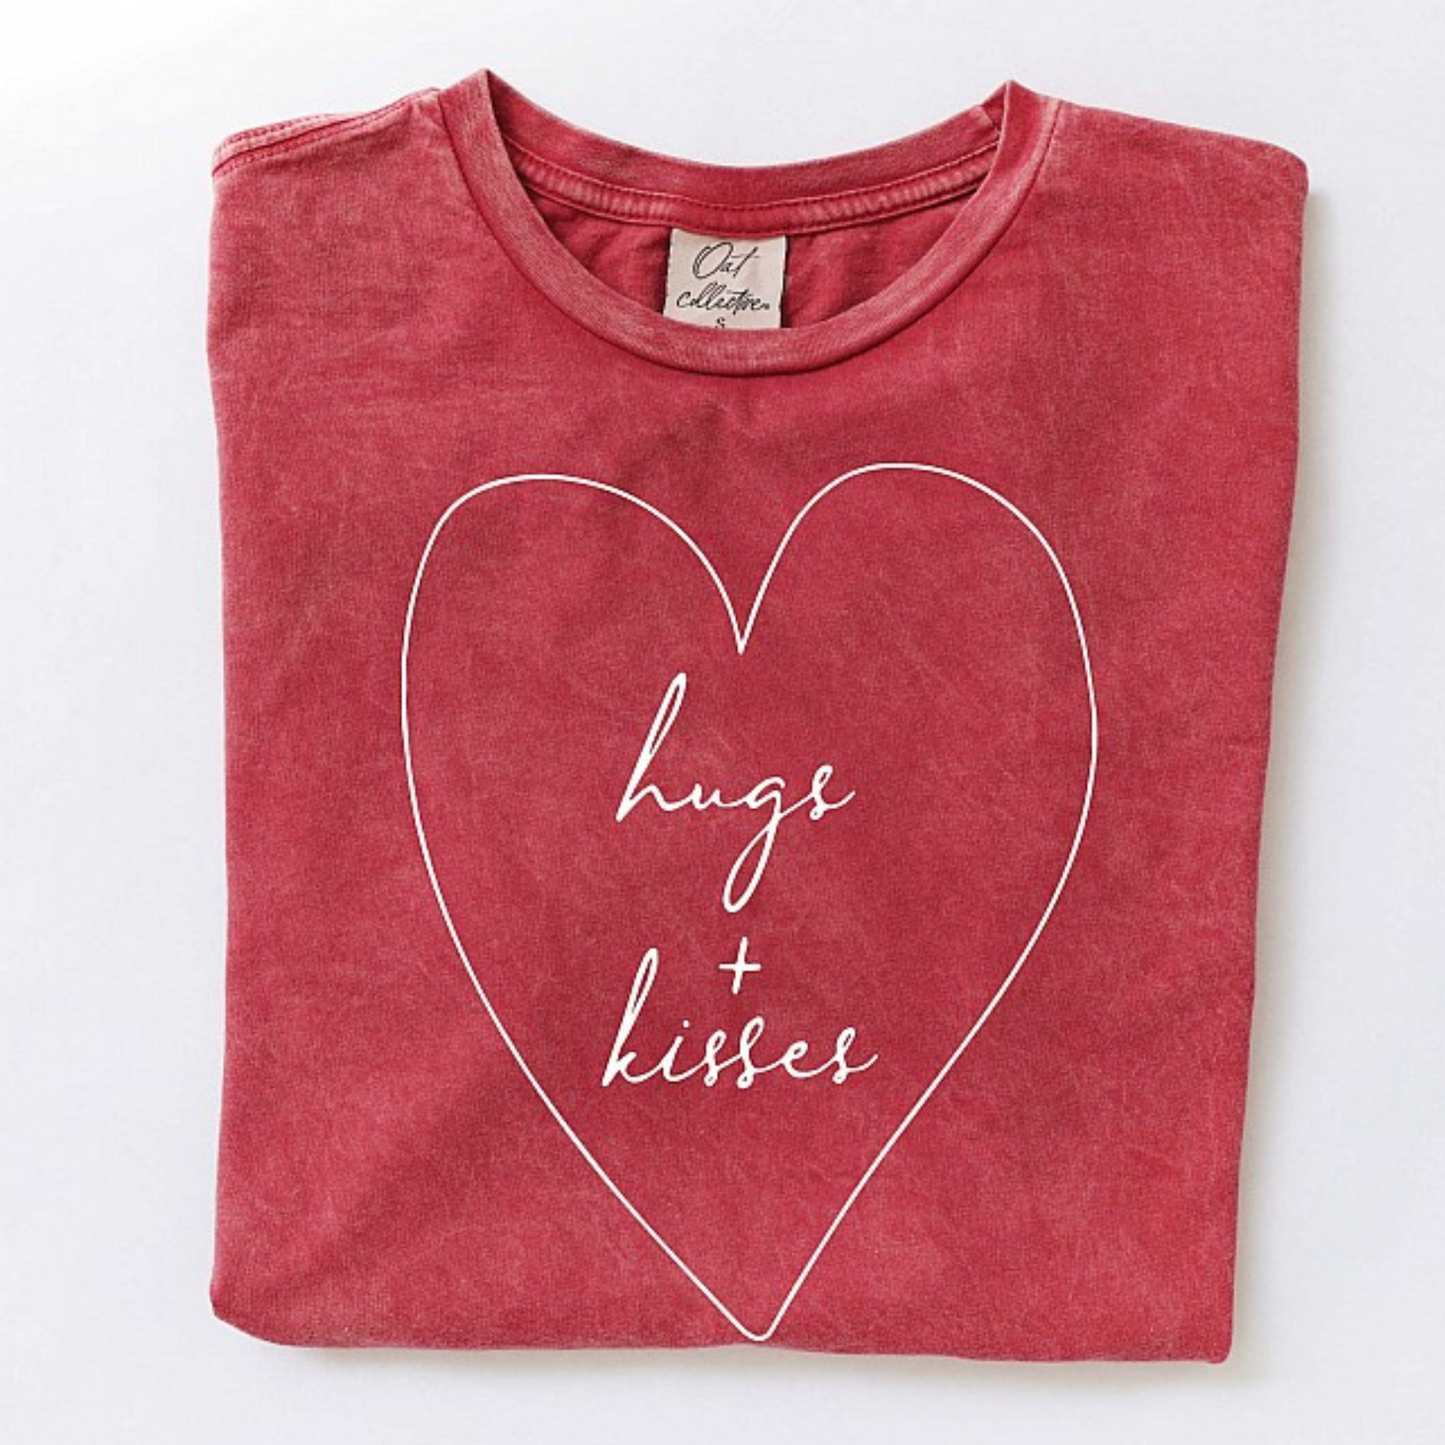 Hugs + Kisses Women's Mineral Graphic Tee, Cardinal